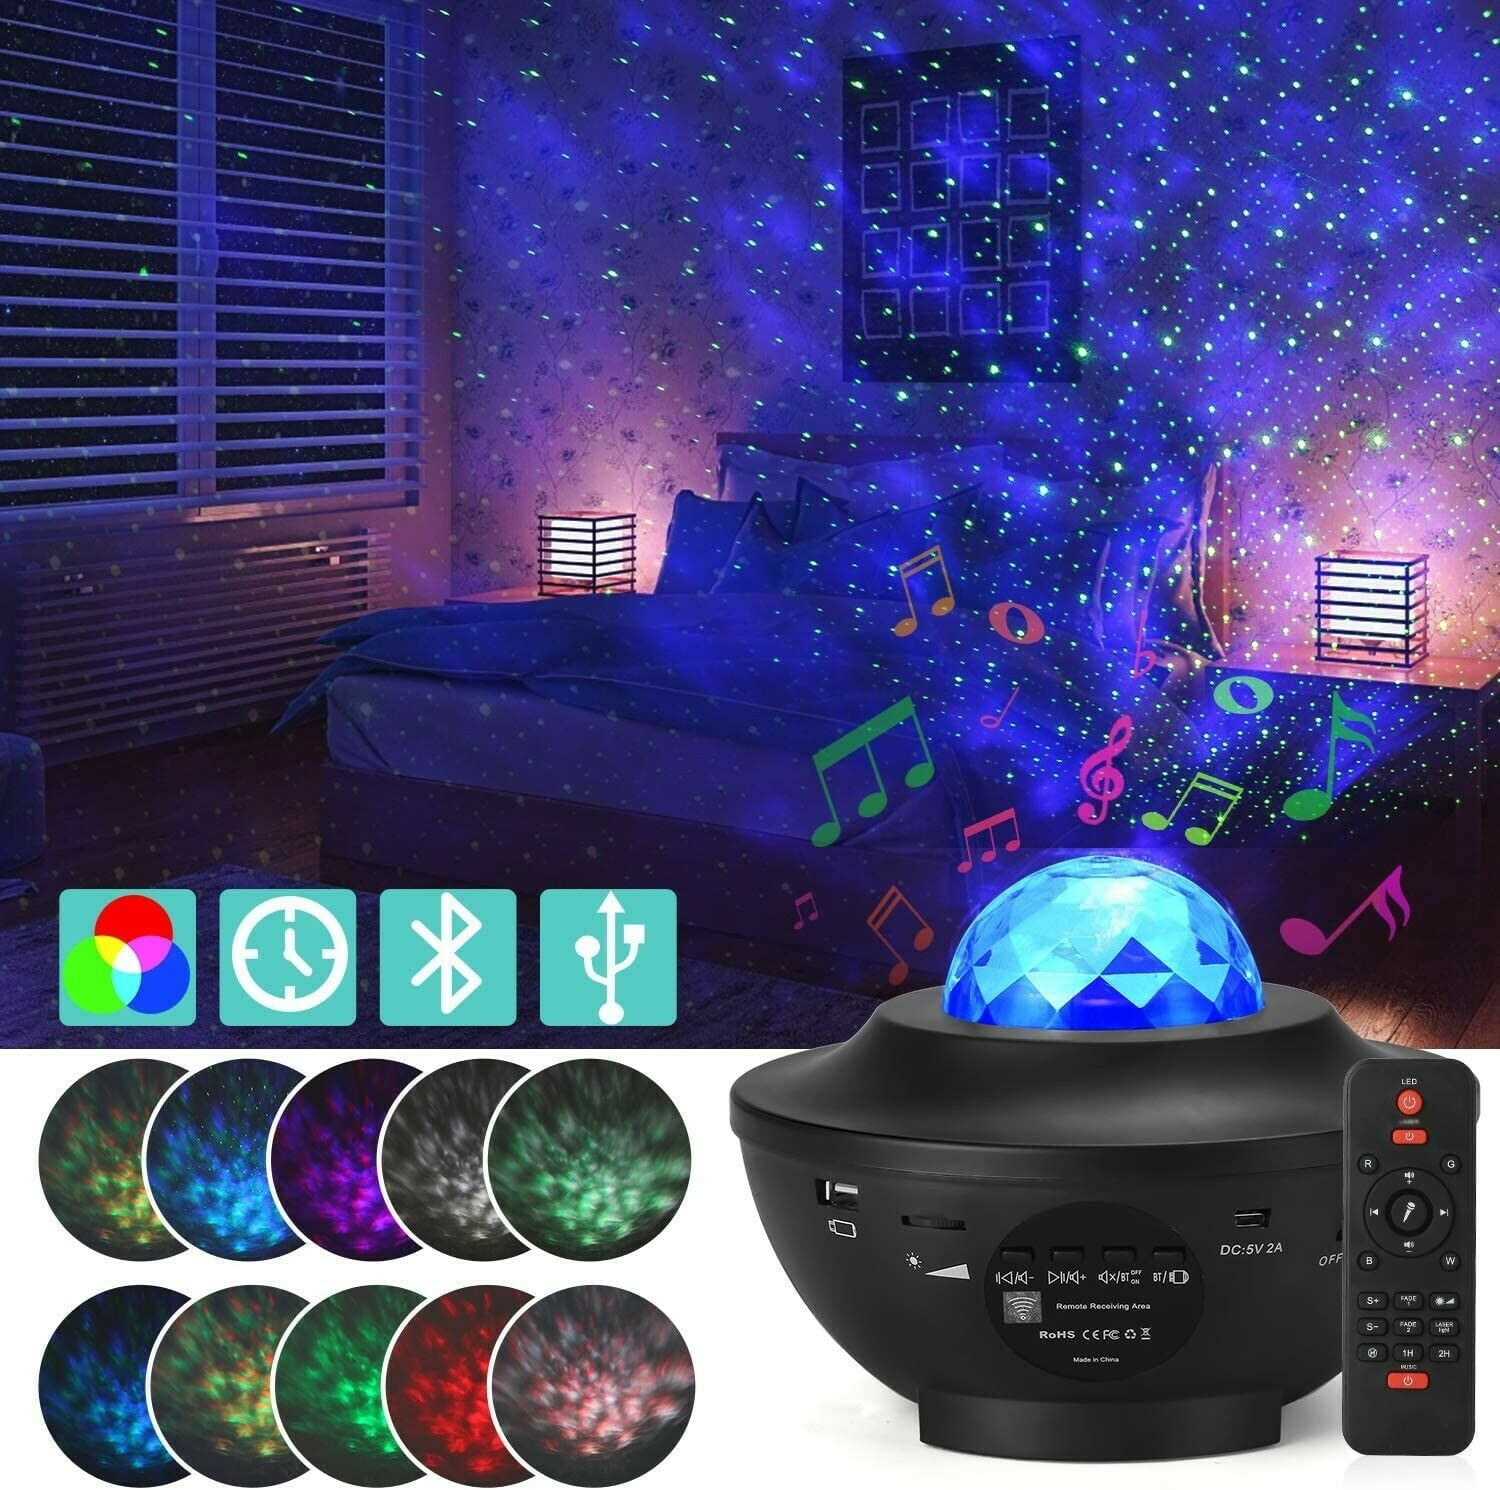 Galaxy Projector Star Light Projector for Bedroom | 3 in 1 Premium